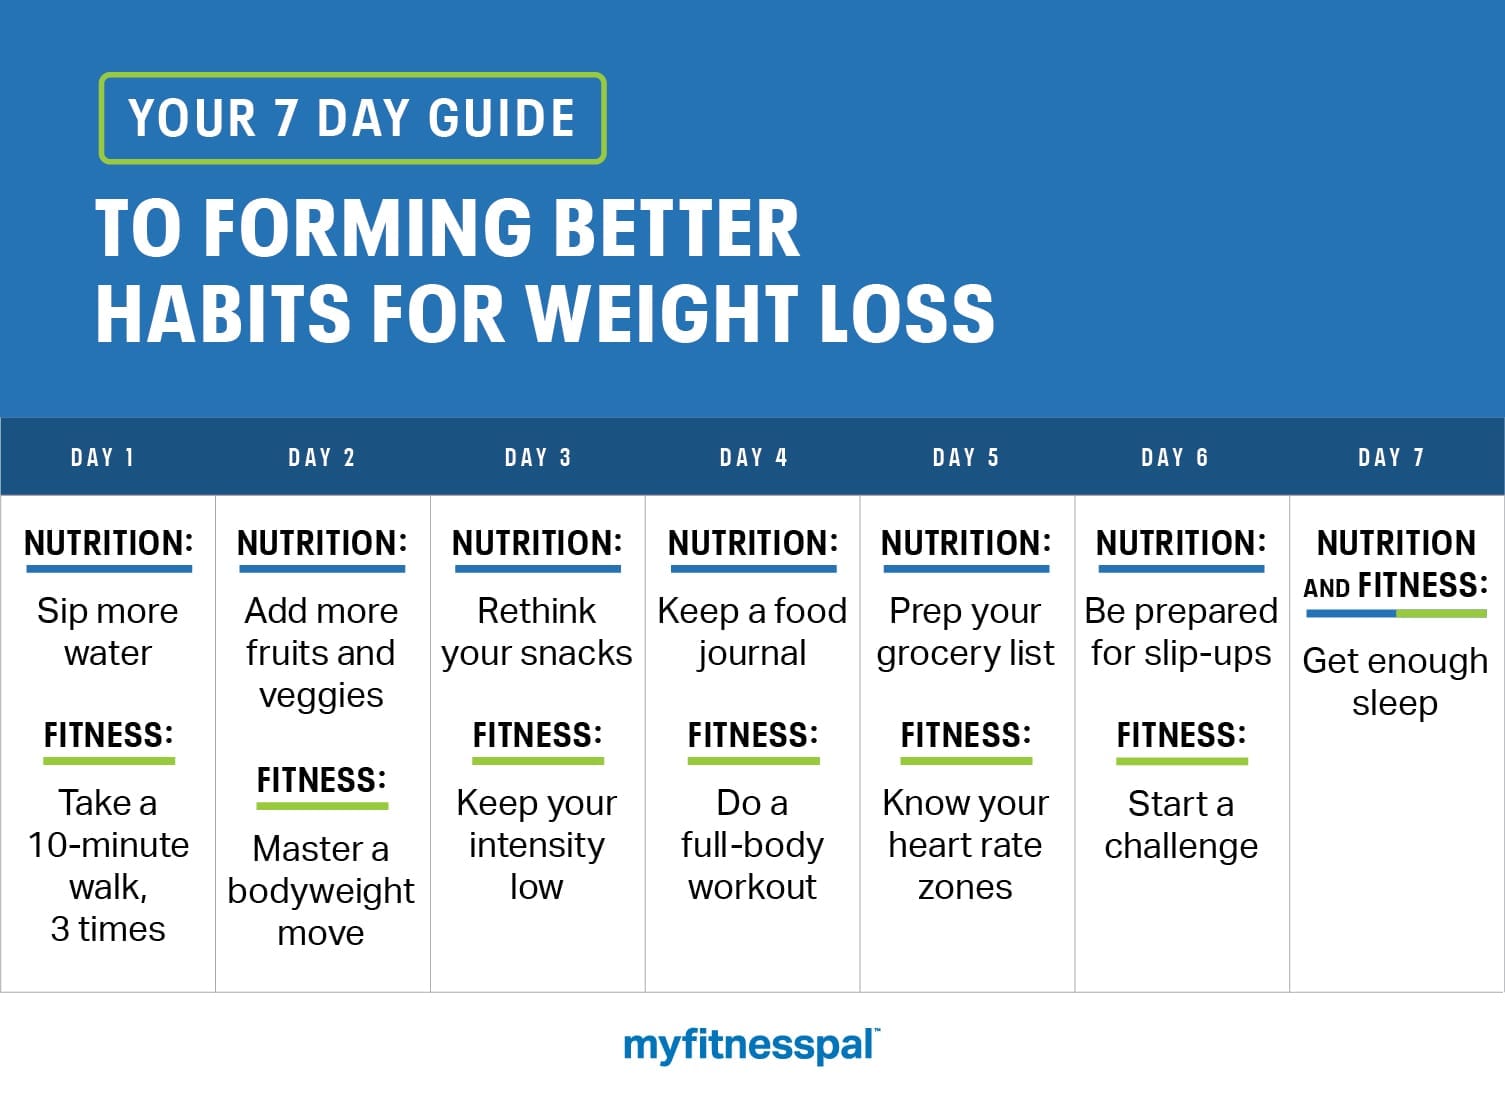 Your 7-Day Guide to Forming Better Habits For Weight Loss